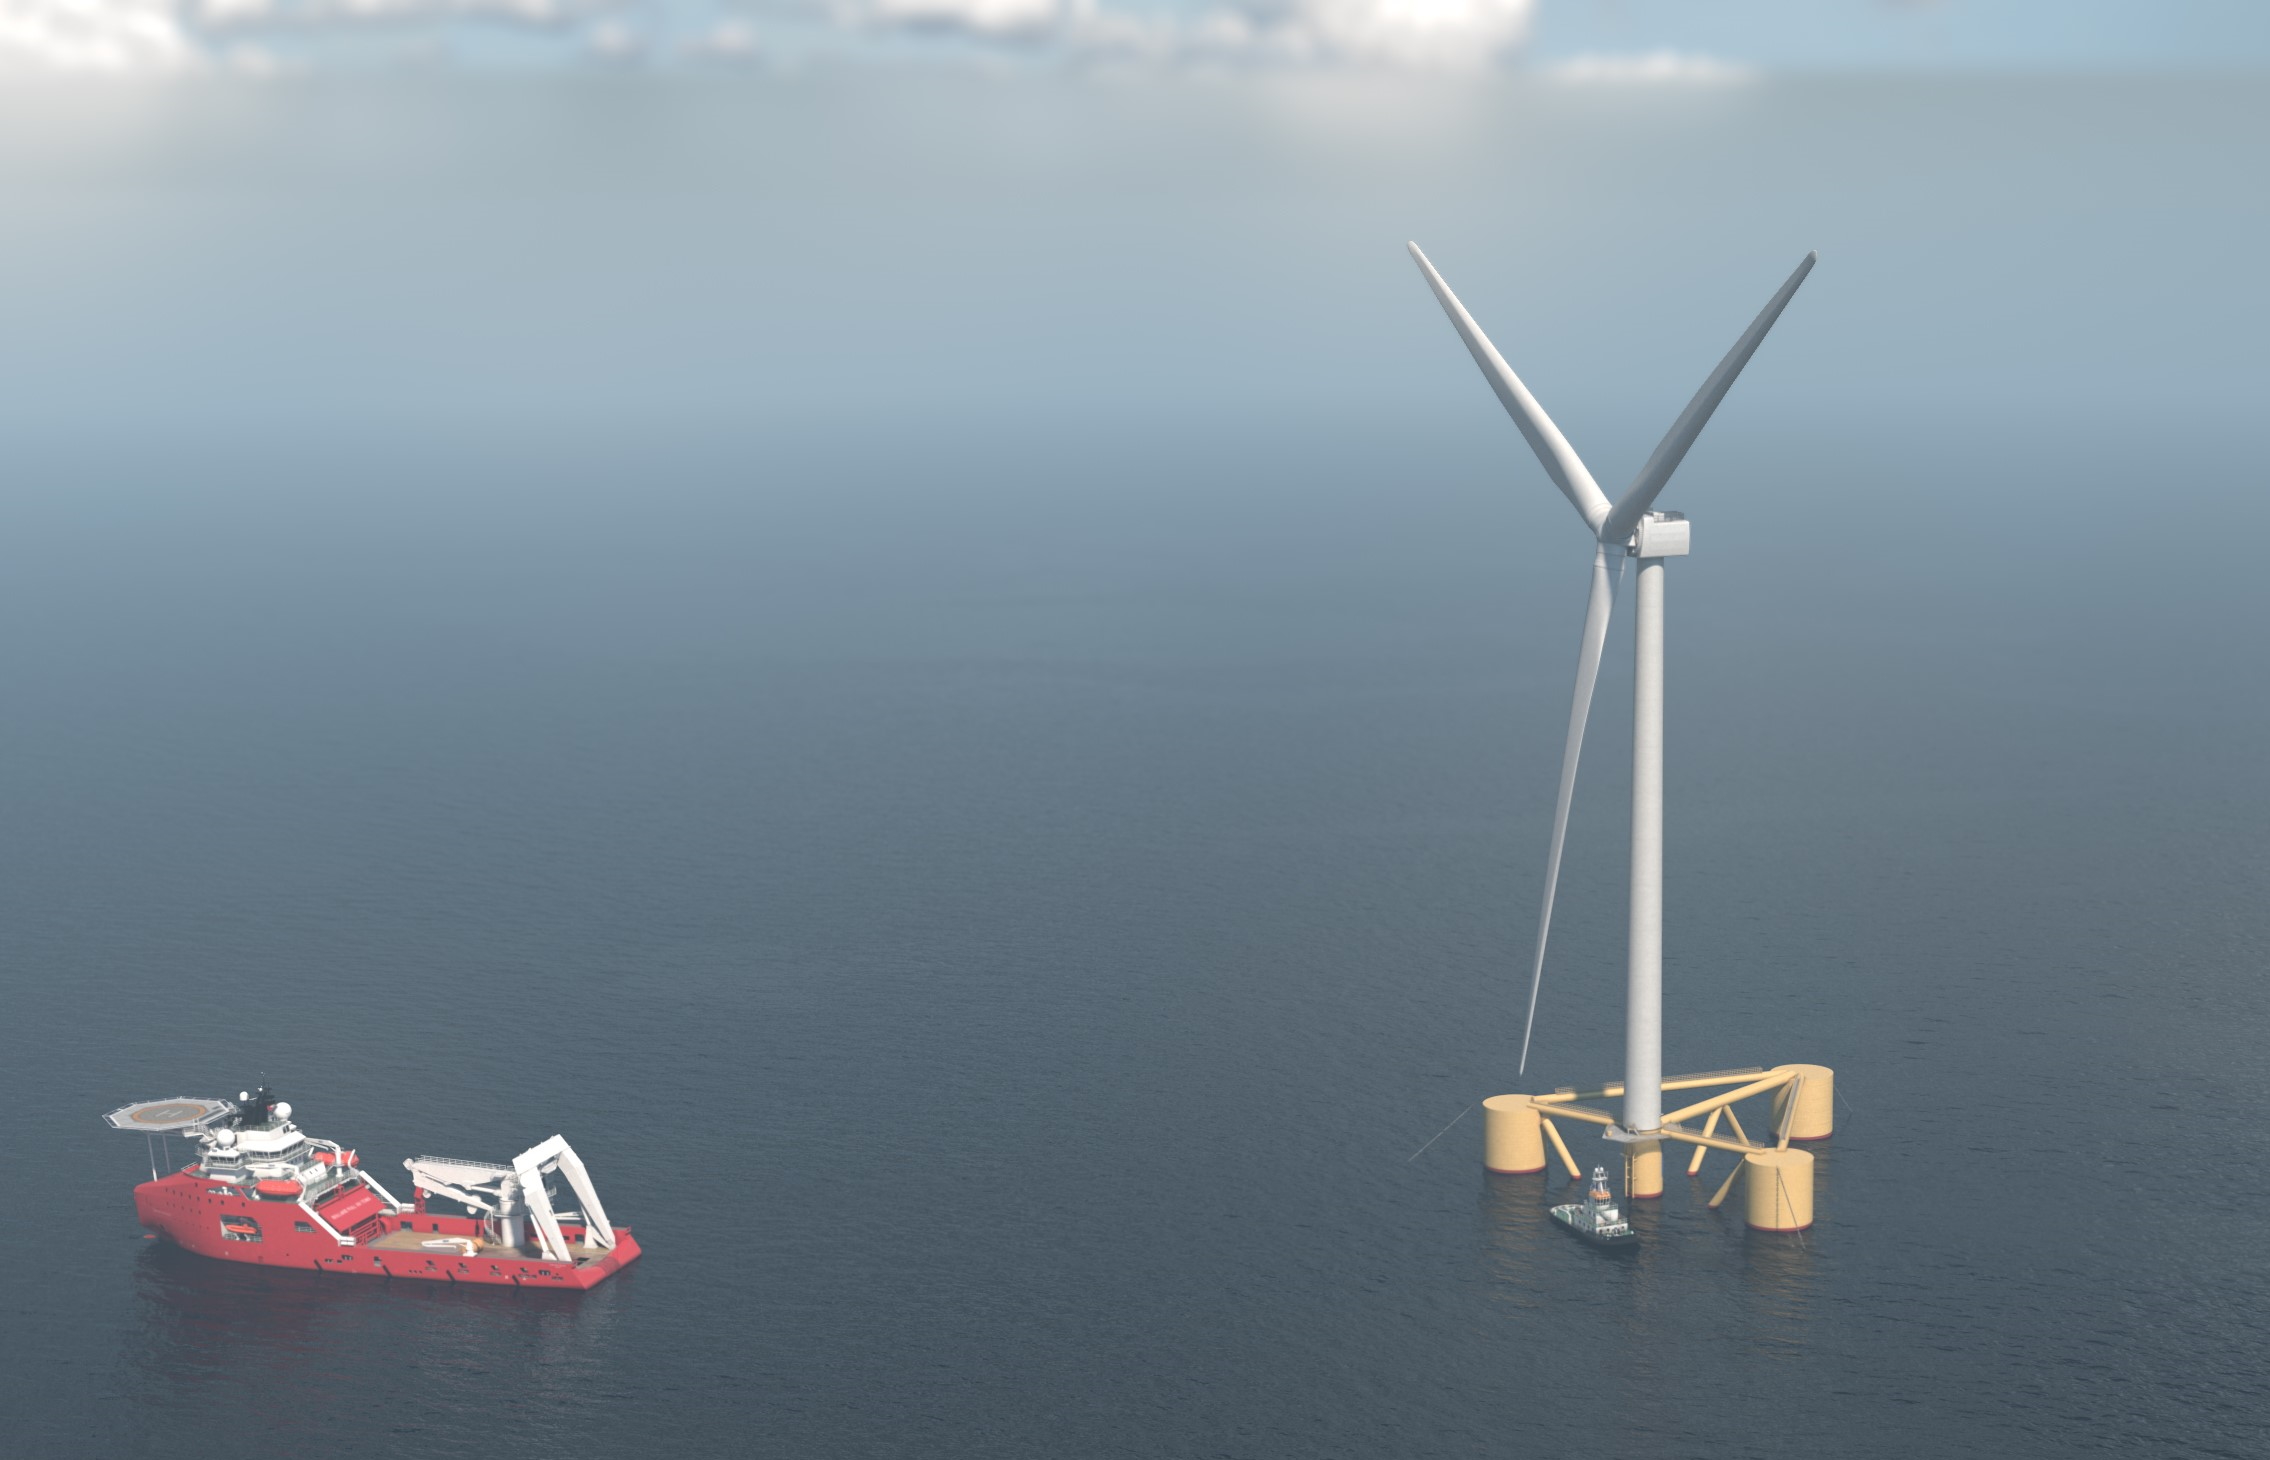 An image showing a floating wind turbine